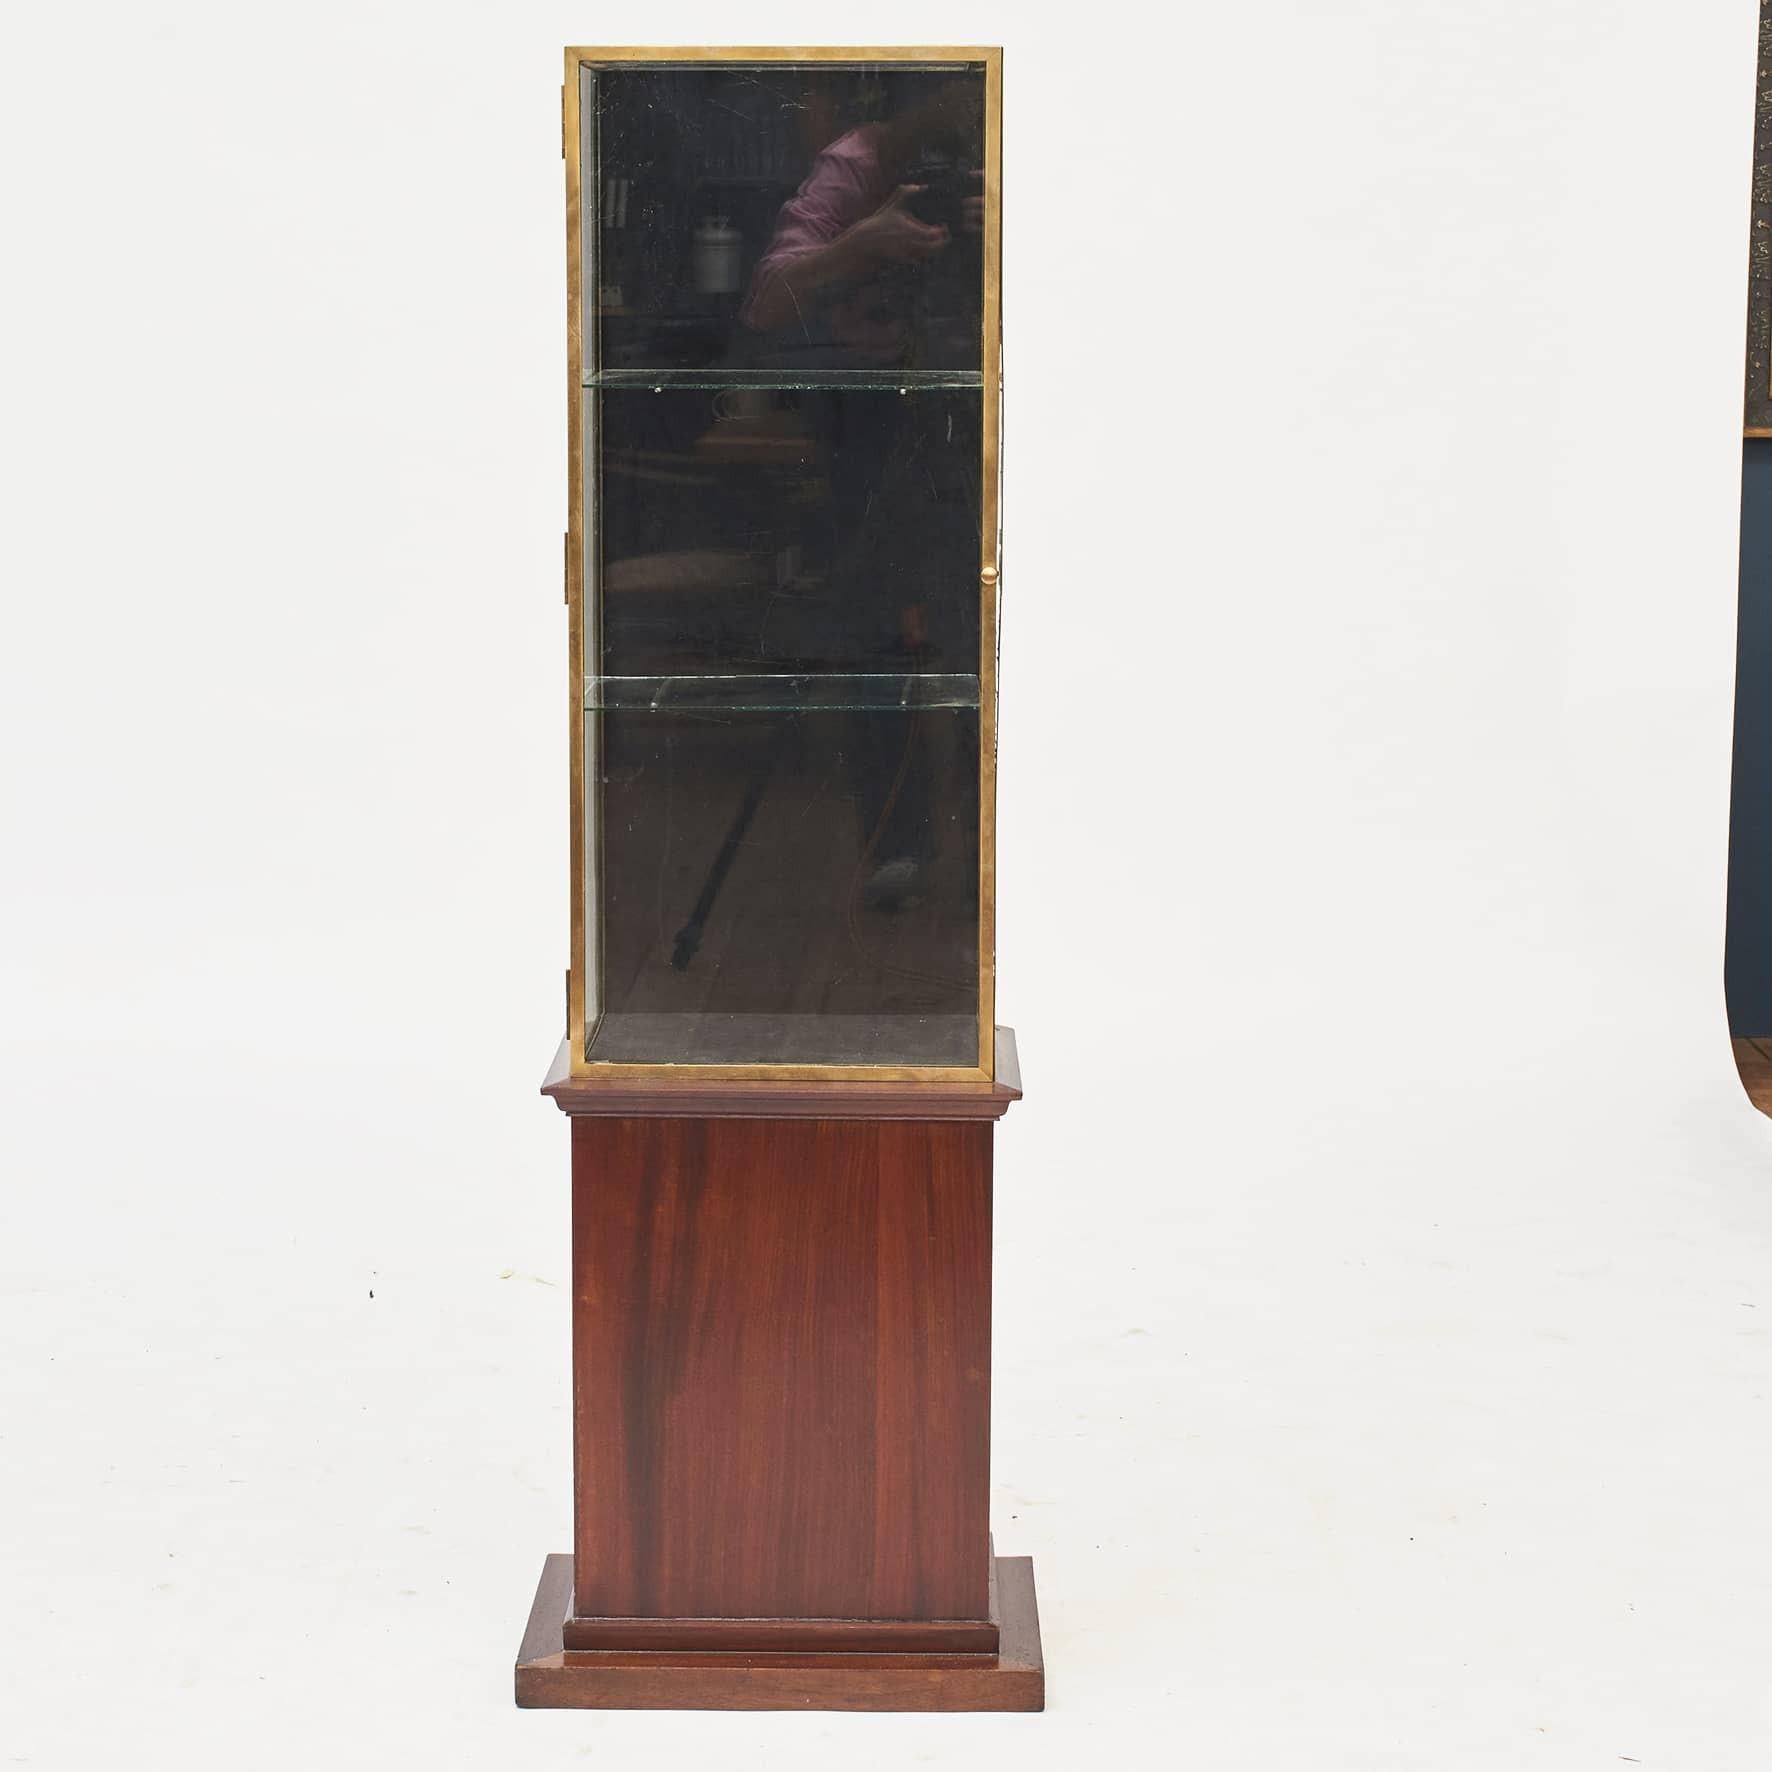 Art deco display case made from glass and brass on original mahogany stand.
The interior, back and bottom, is covered with black velvet. Glass shelves on original brackets.

France approx. 1920.
Measures:height total: 141 cm. Height of